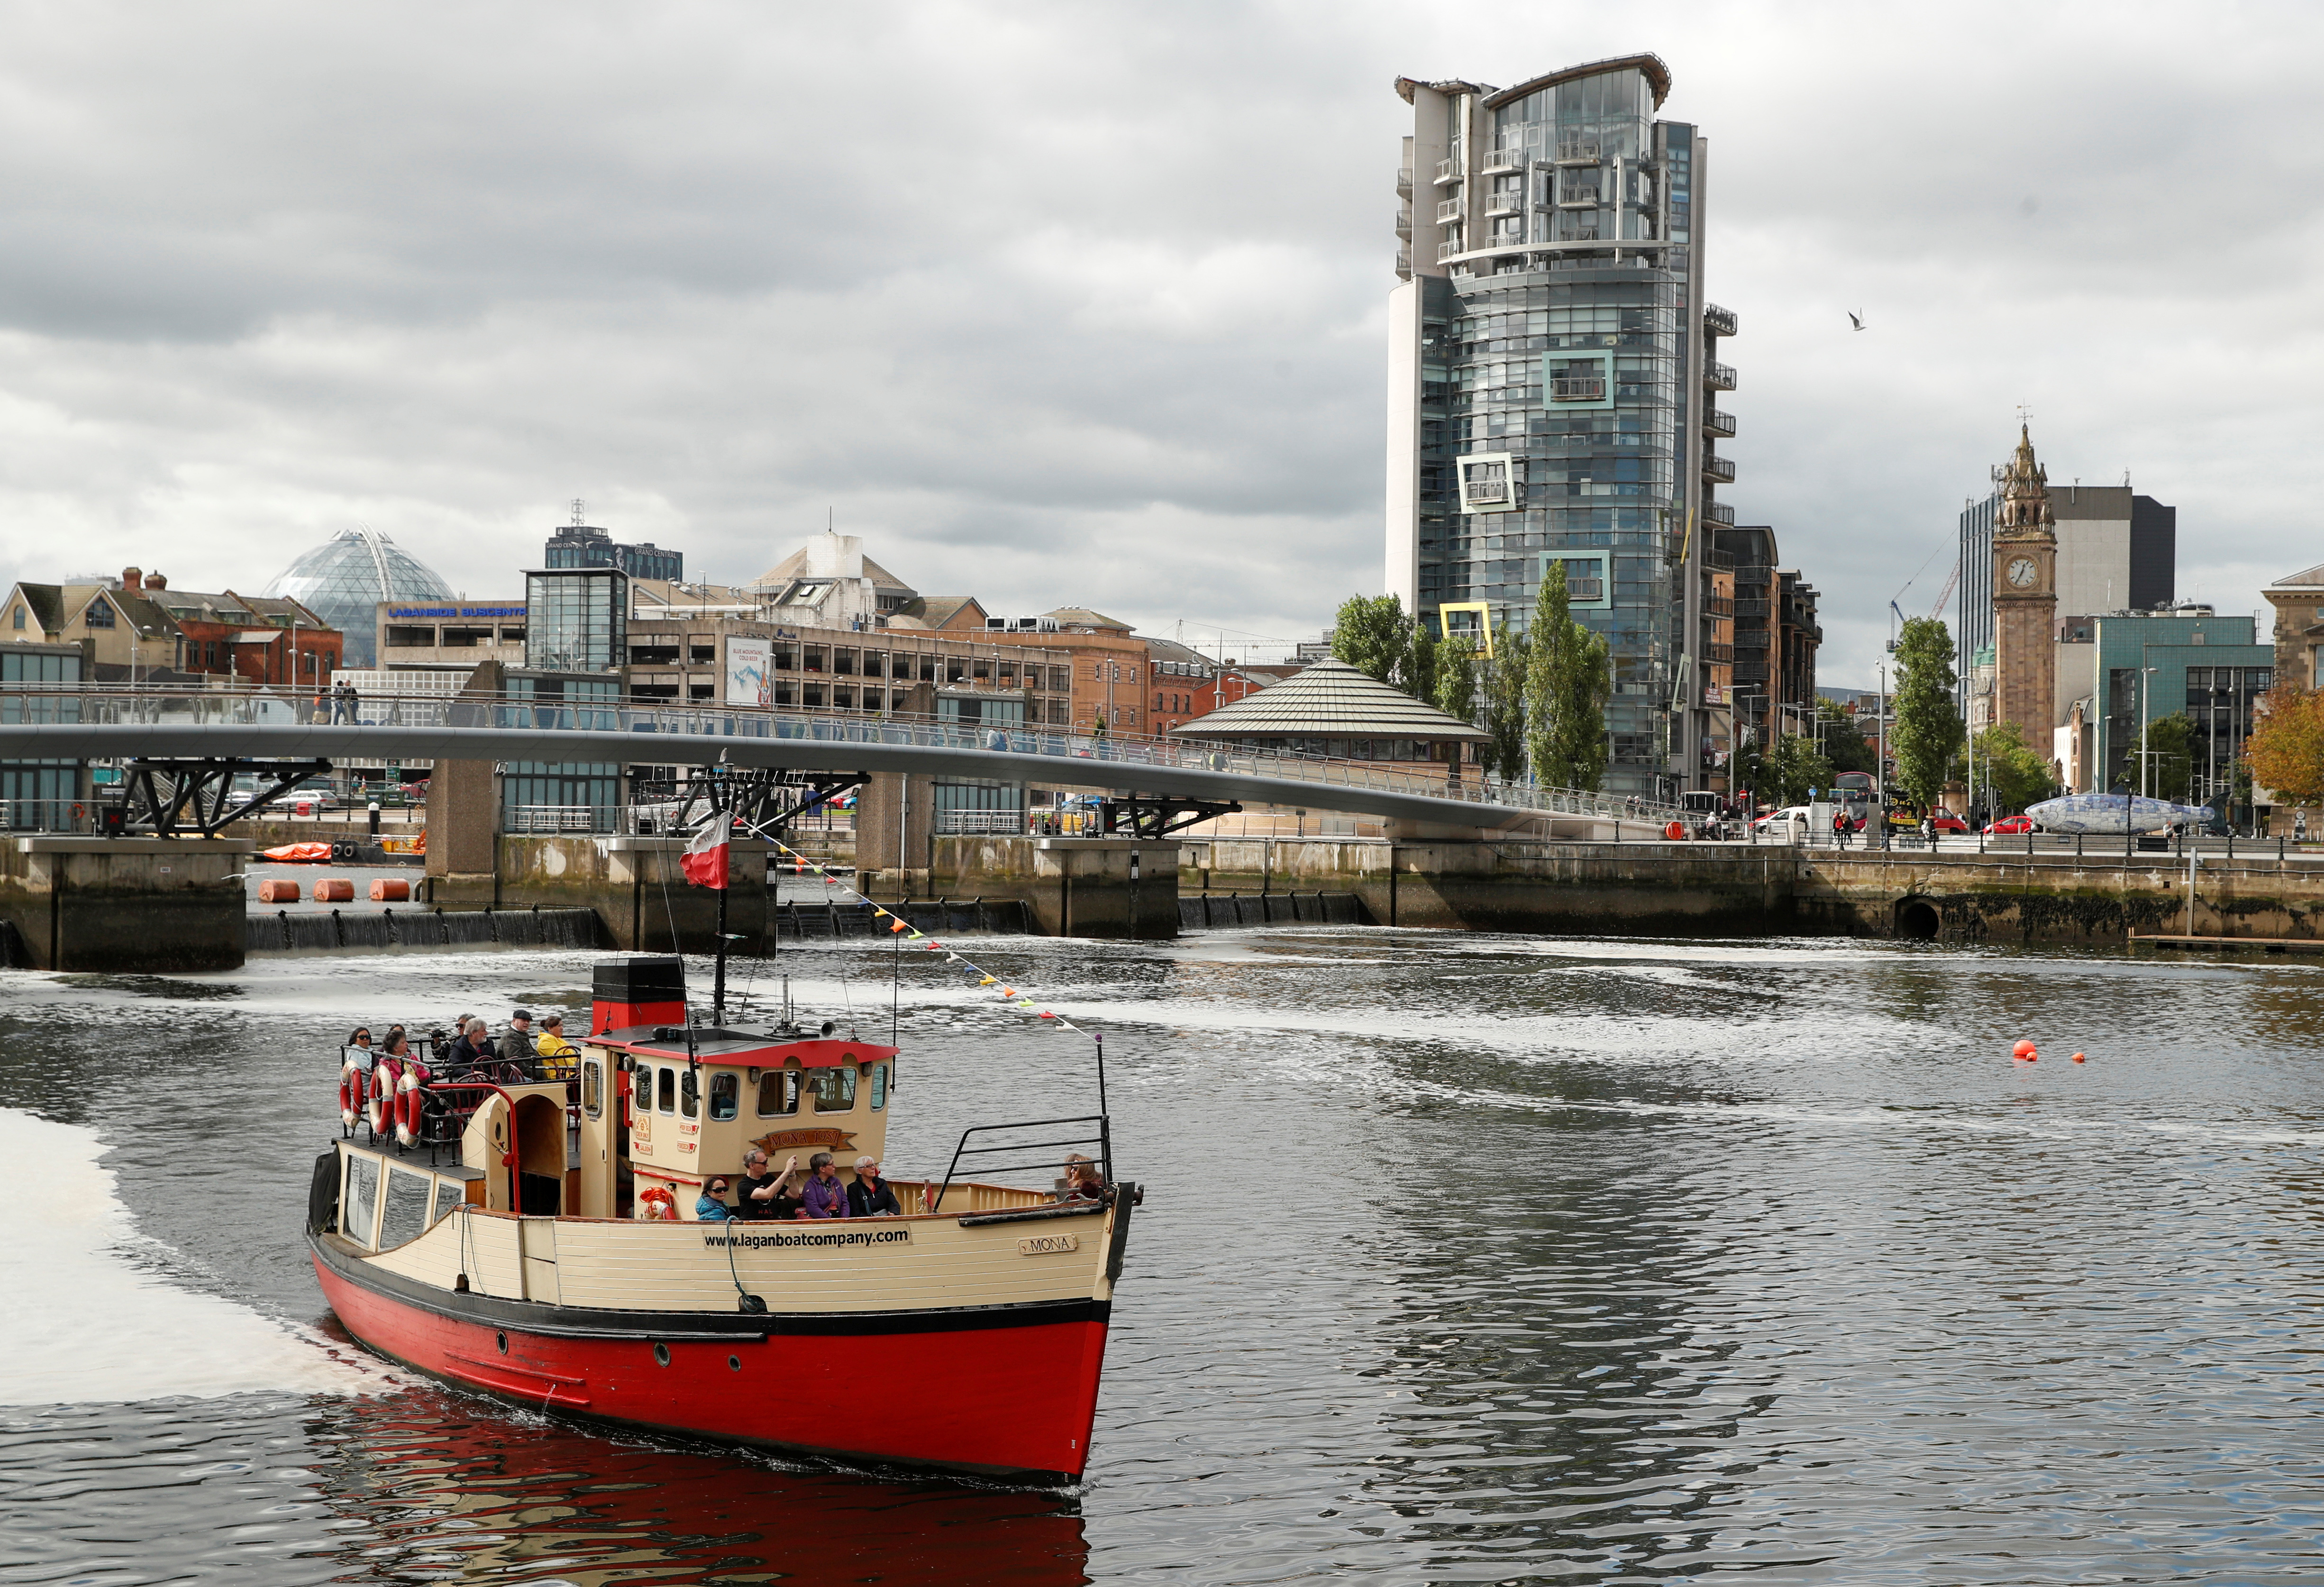 A tourist boat is seen on the river Lagan in Belfast